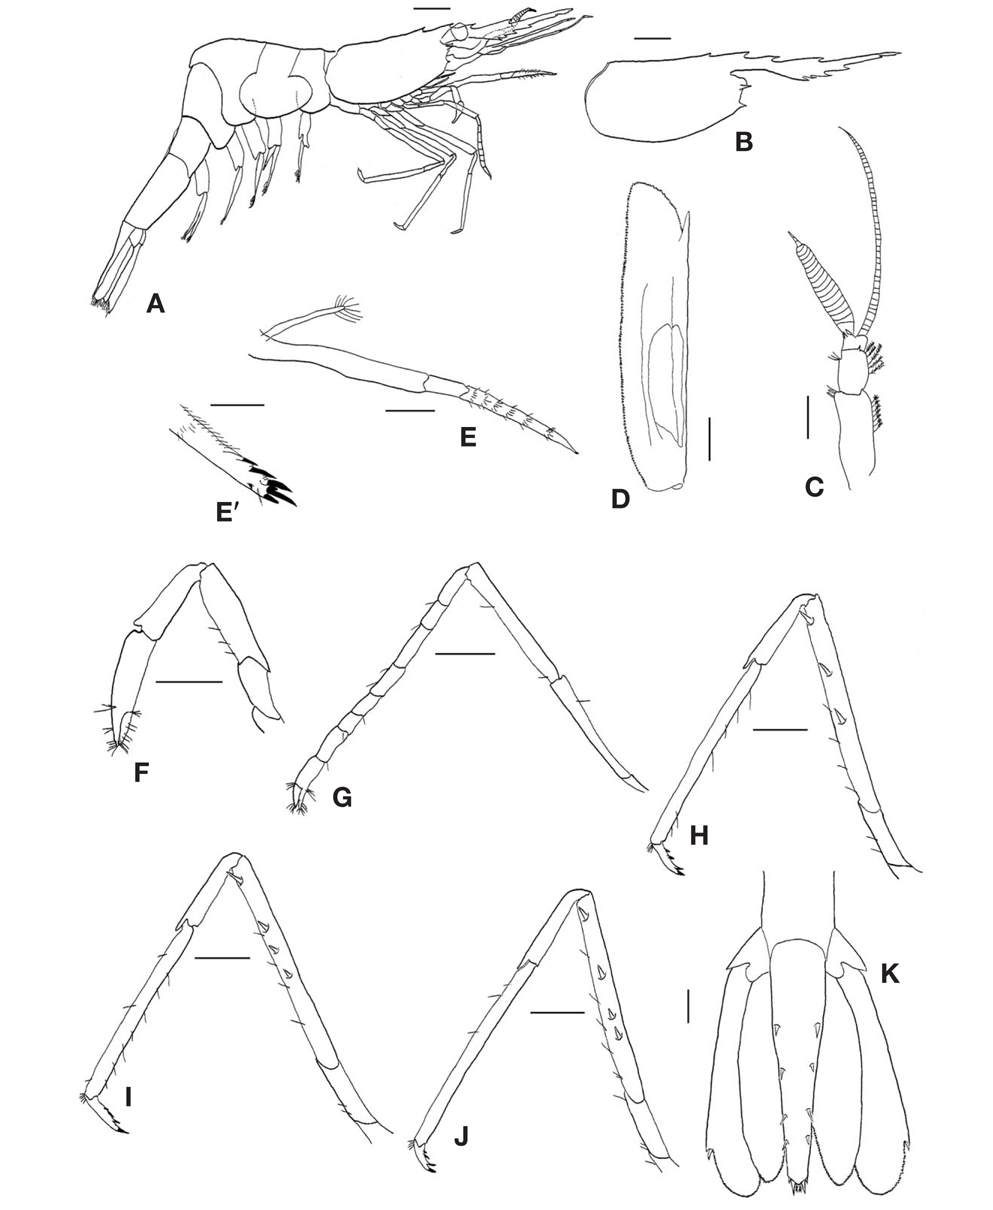 Eualus kuratai, male (CL 8.08 mm). A, Habitus, lateral; B, Carapace, lateral; C, Left antennule, dorsal; D, Right antennal scale, dorsal; E, Left third maxilliped, lateral; E′, Left third maxilliped, distal segment; F, Right 1st pereopod, lateral; G, Left 2nd pereopod, lateral; H, Left 3rd pereopod, lateral; I, Left 4th pereopod, lateral; J, Left 5th pereopod, lateral; K, Telson, dorsal. CL, length of posterior margin of the orbit to the posterior middorsal margin of the carapace. Scale bars: A, B=2 mm, C-K=1 mm, E′=0.5 mm.